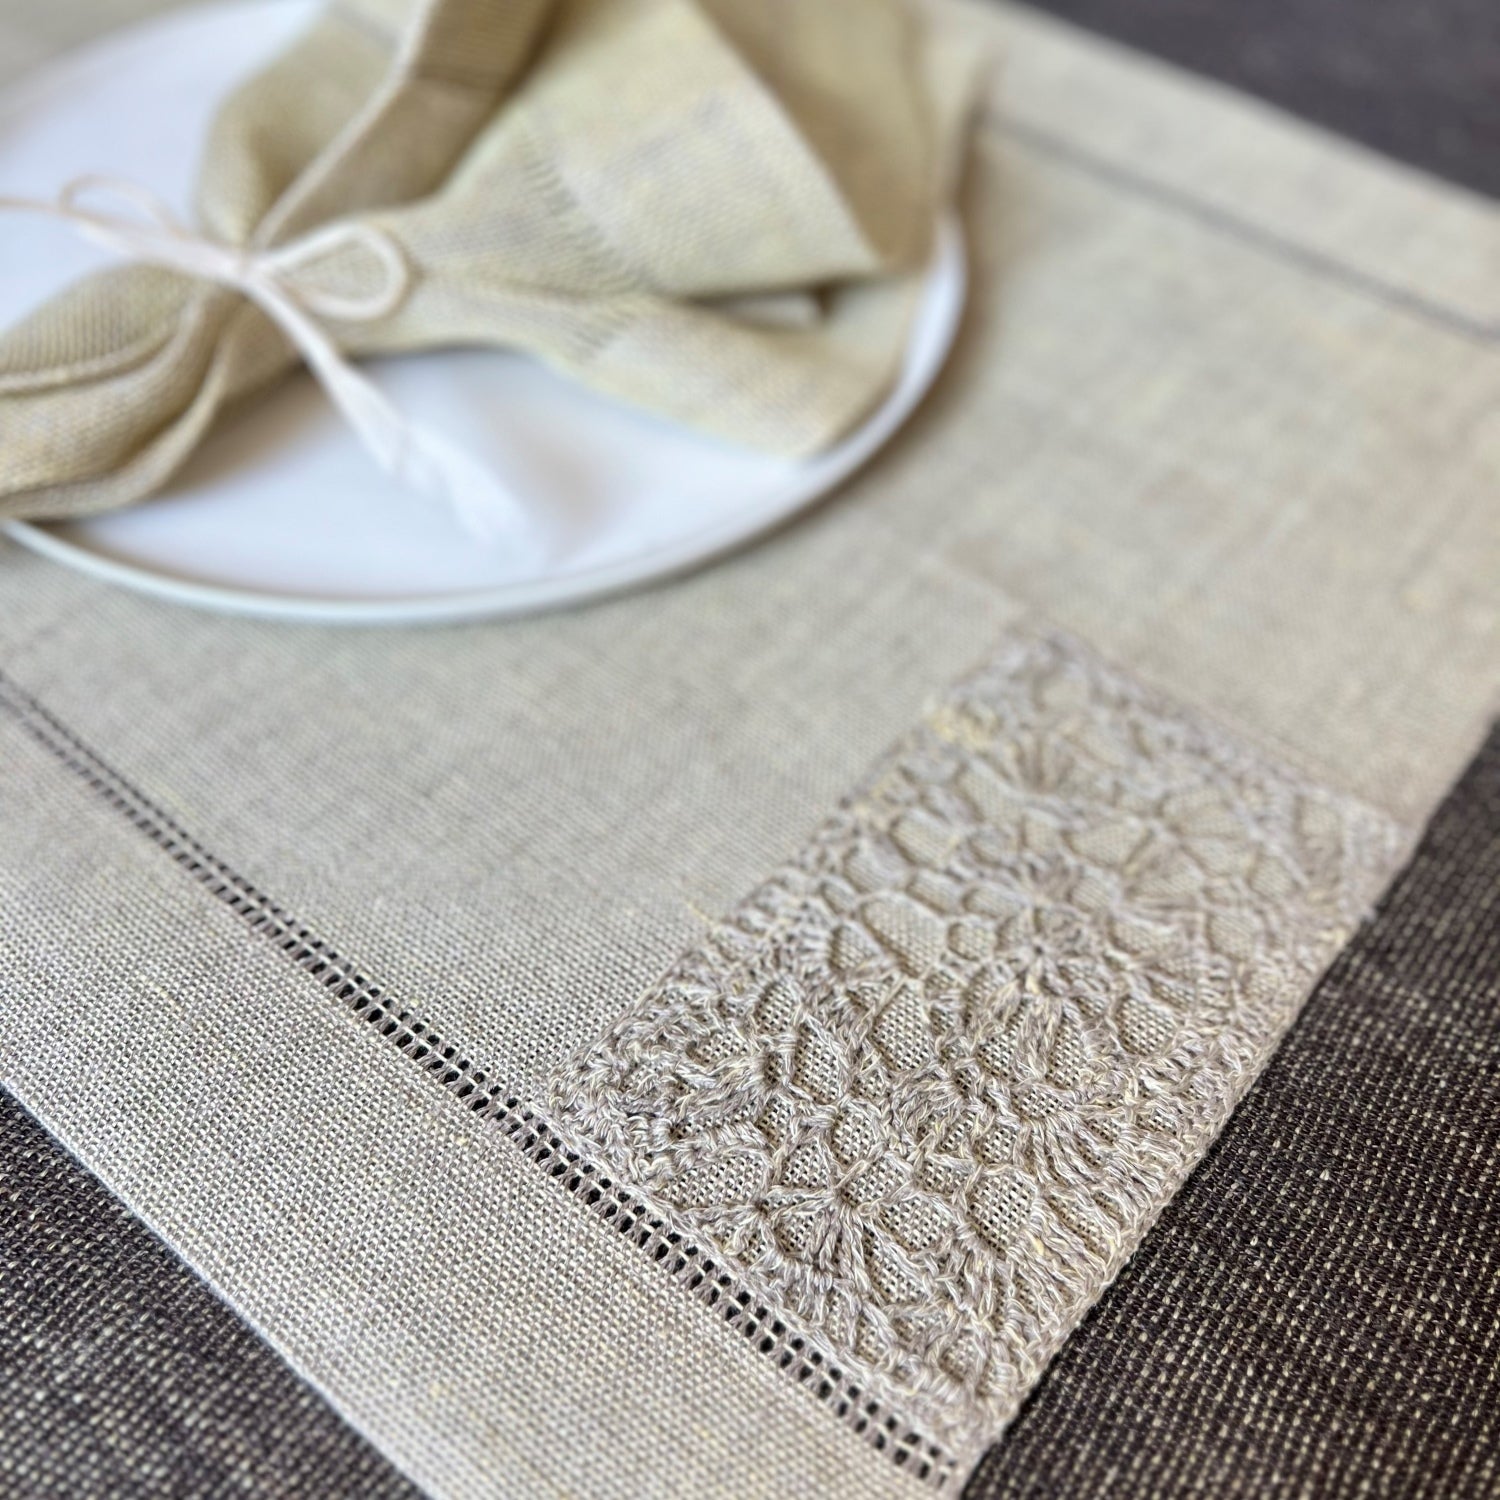 Handwoven linen placemat in mustard with handmade hemstitch and crocheted pocket 50x40 cm